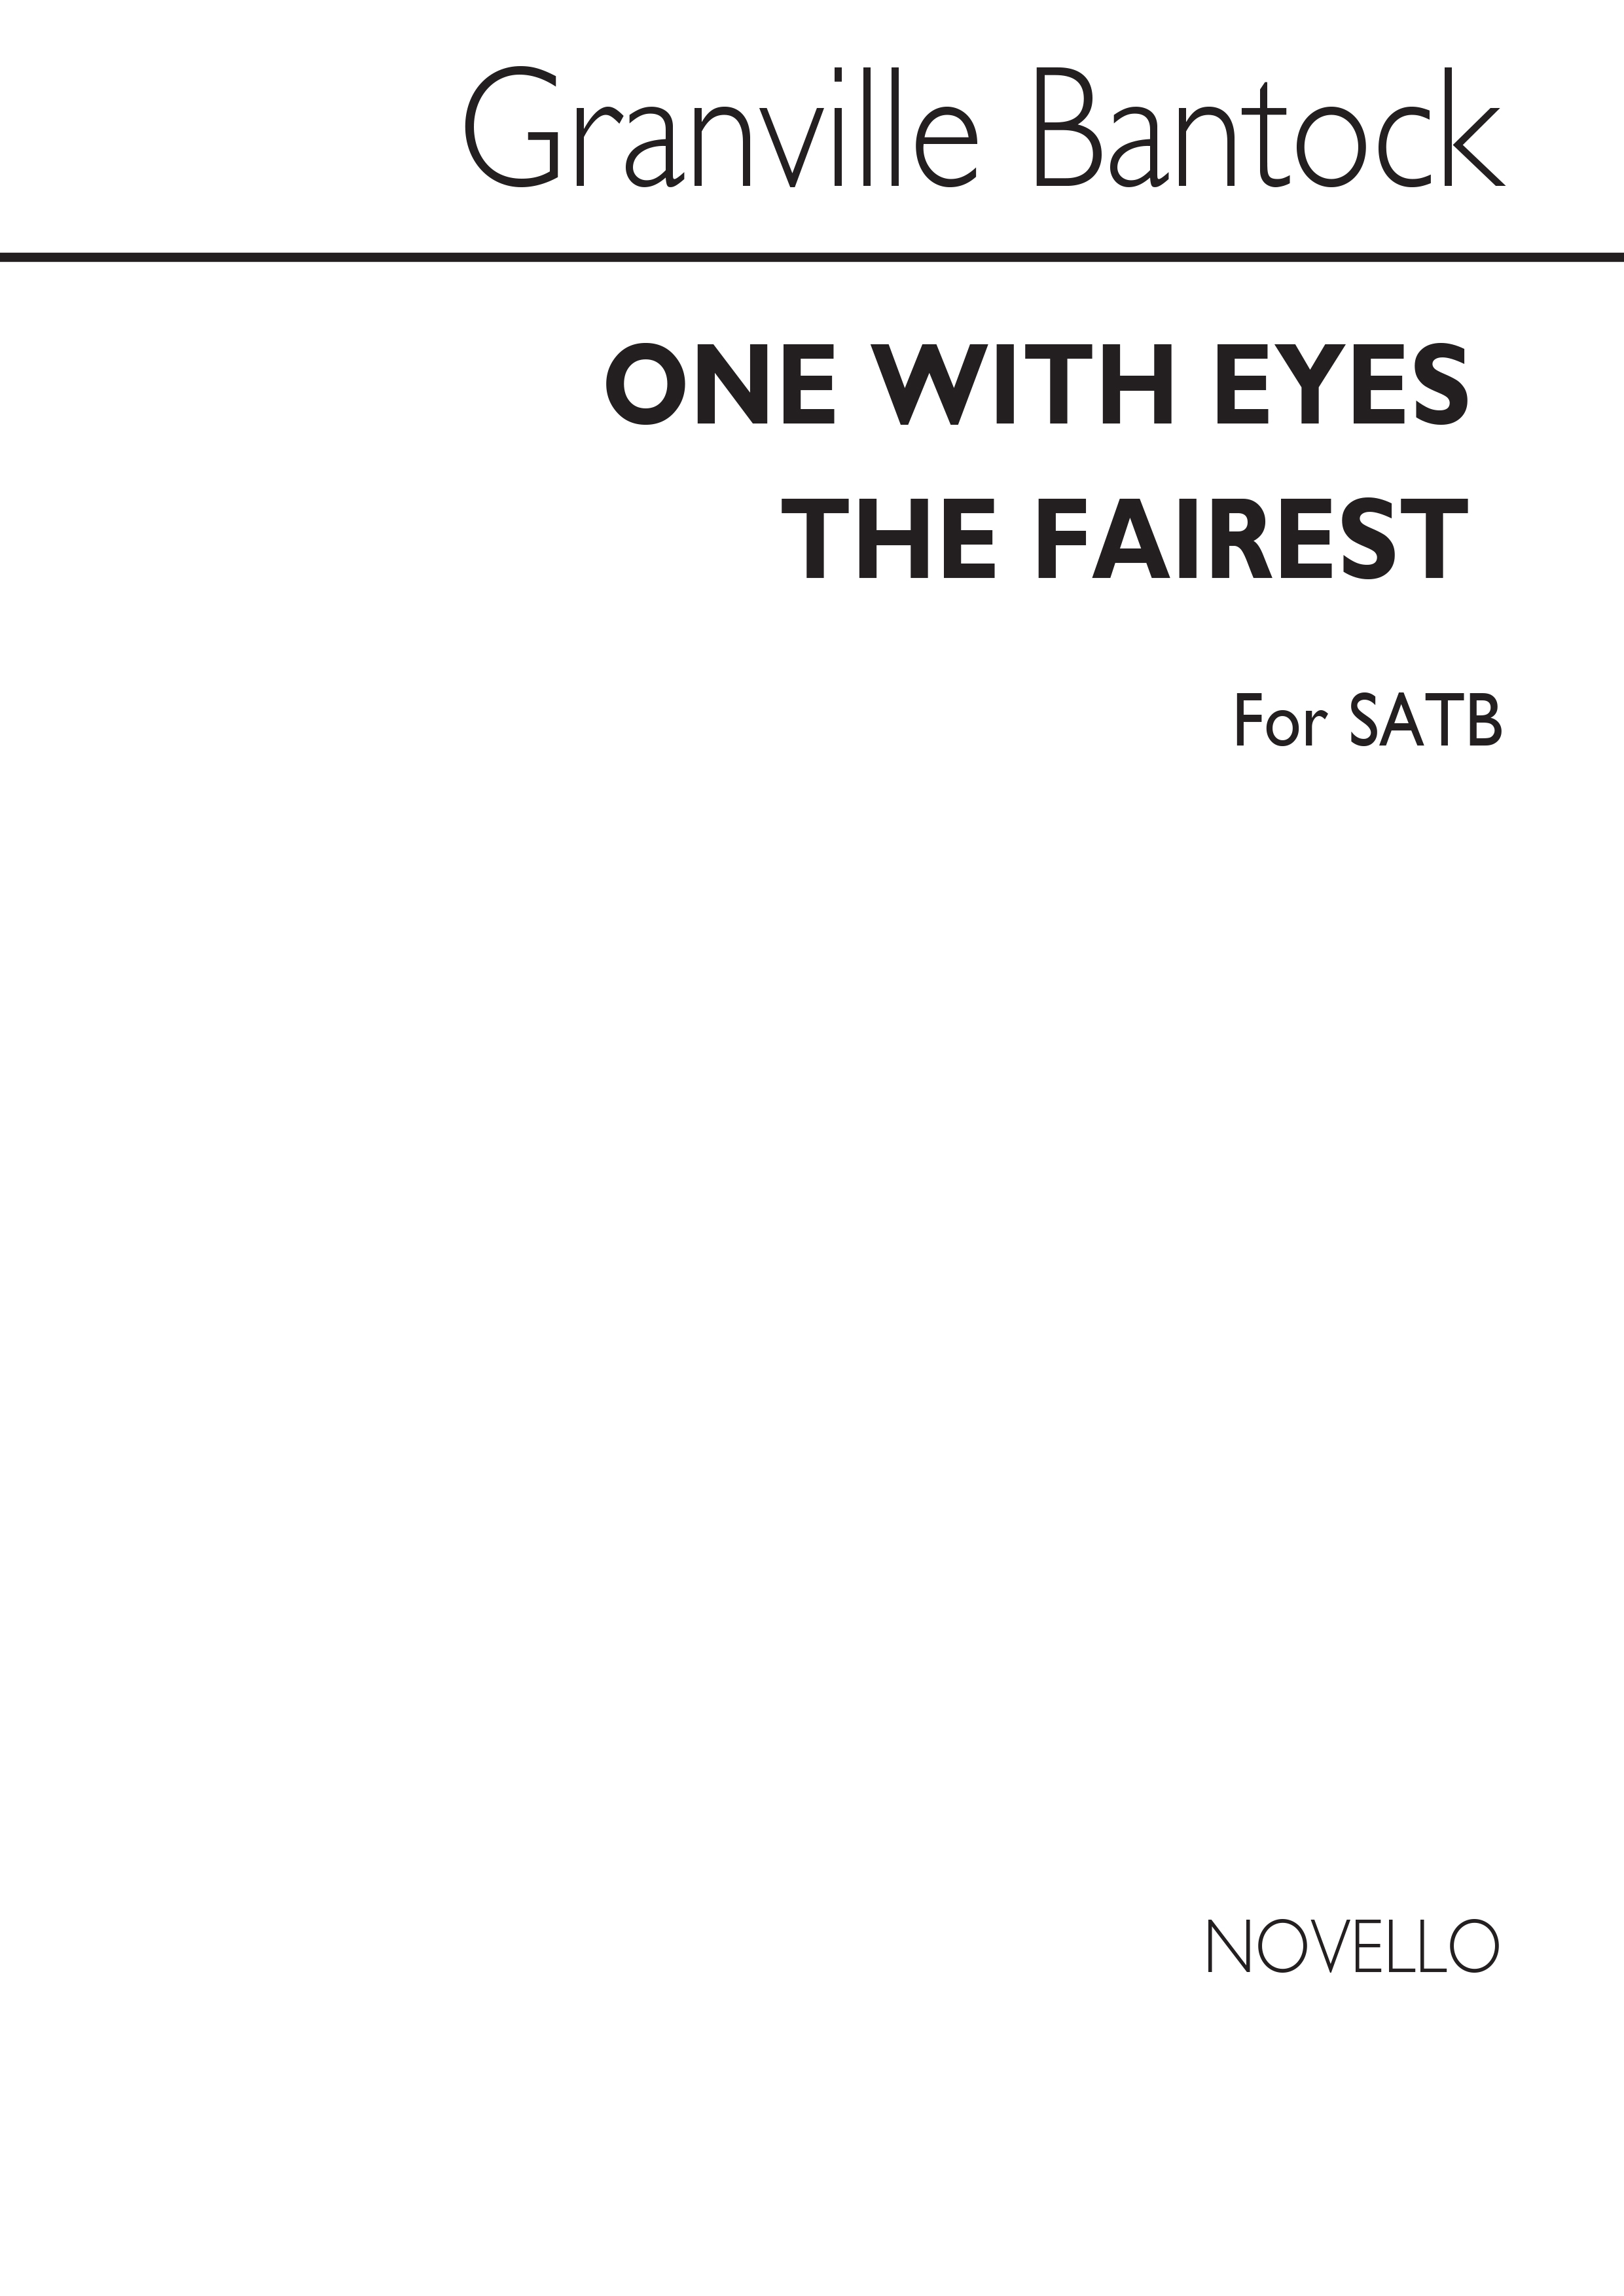 Granville Bantock: One With Eyes The Fairest Satb/Piano